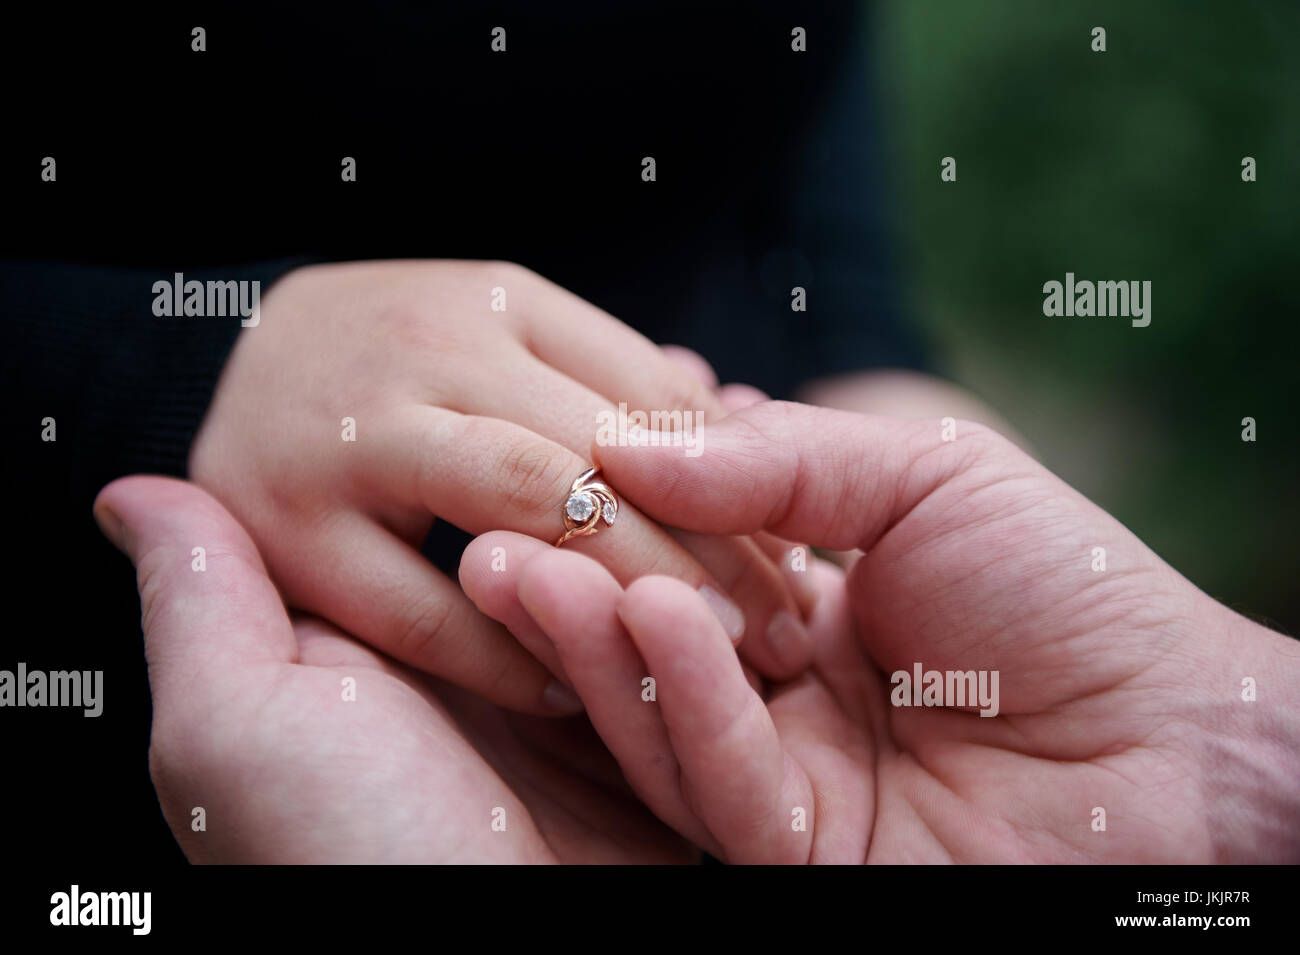 Man dresses an engagement ring on a woman finger. Stock Photo